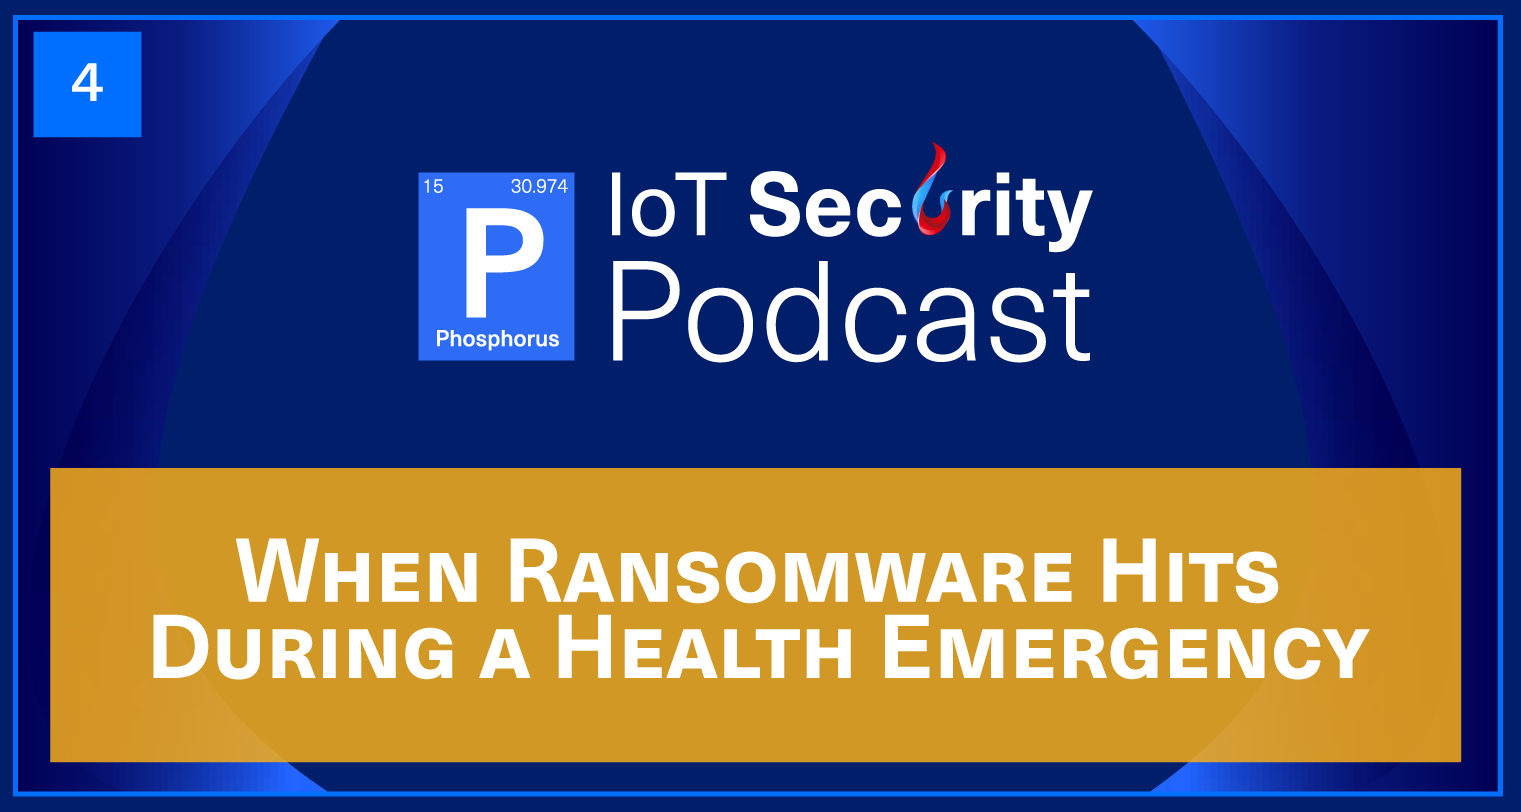 When Ransomware Hits During a Health Emergency